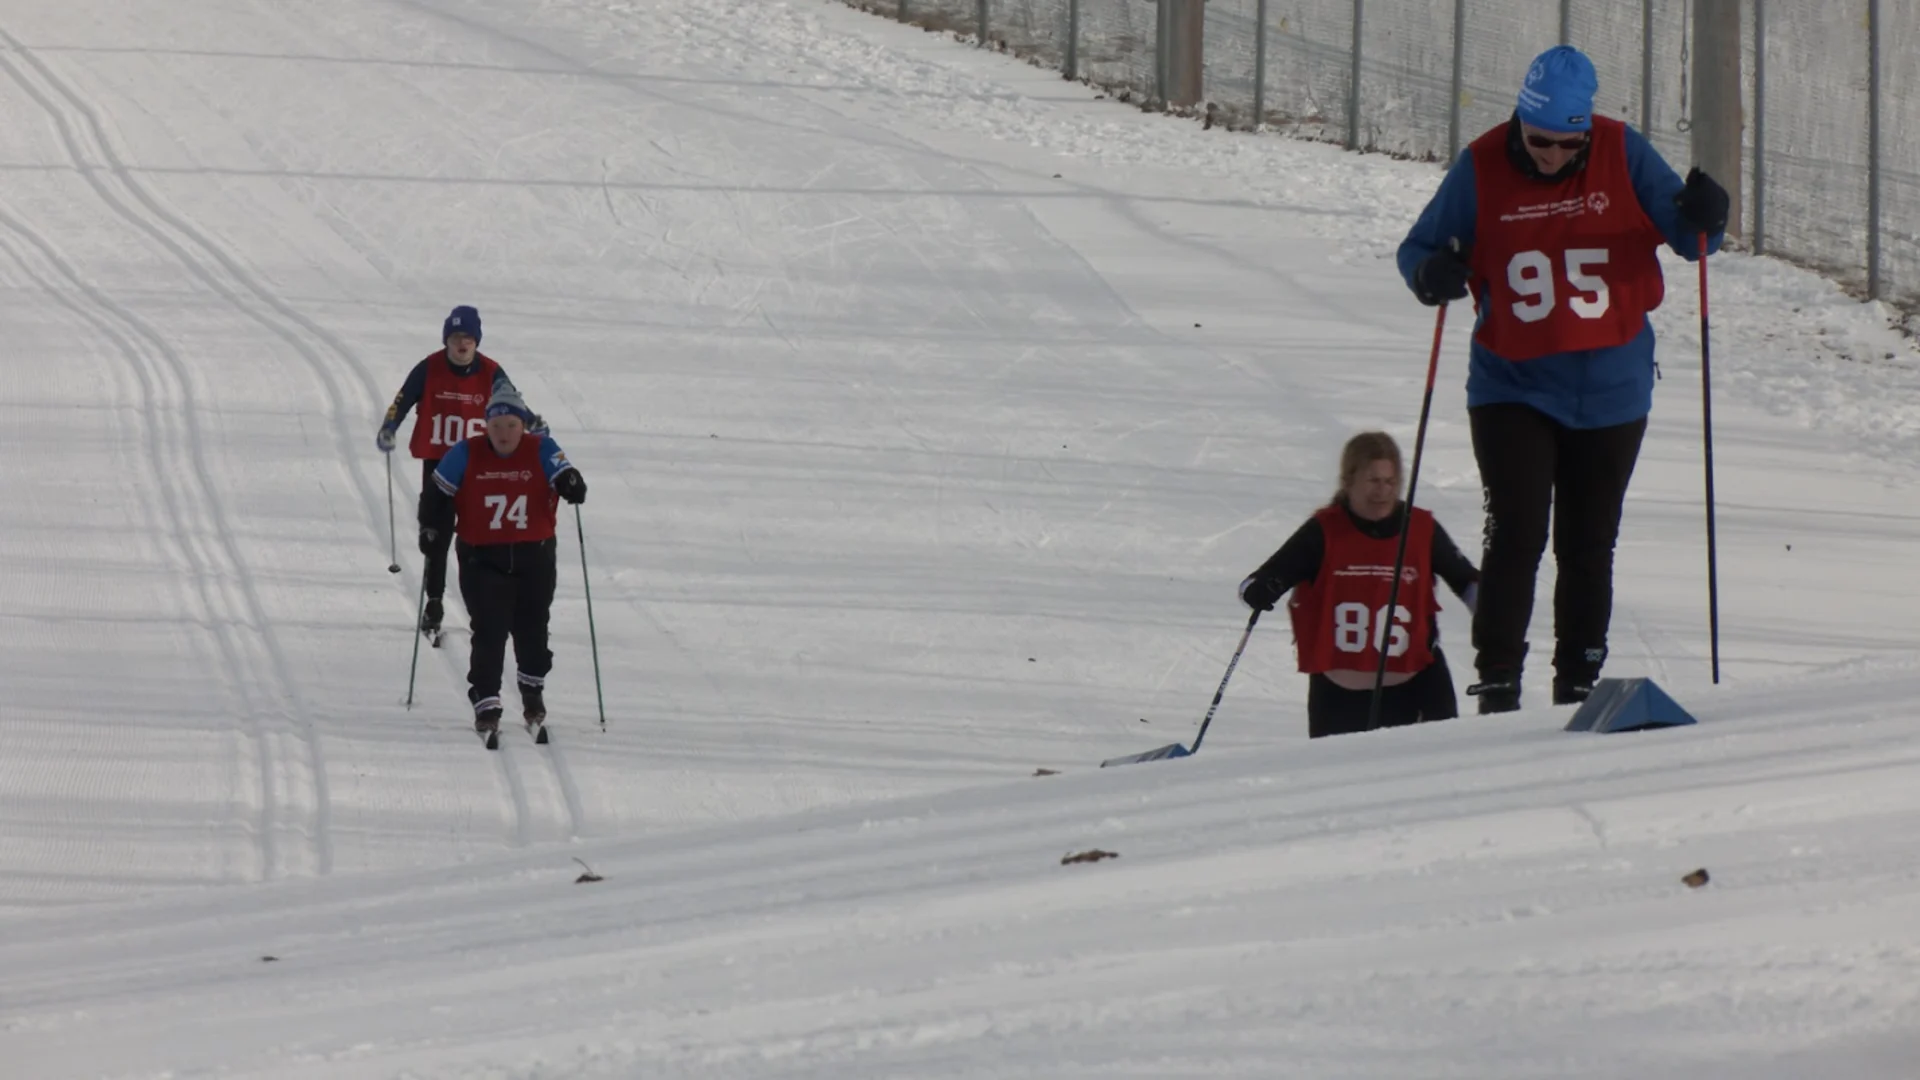 Connor O'Donovan: Cross Country Skiers compete at the Confederation Park Golf Course.